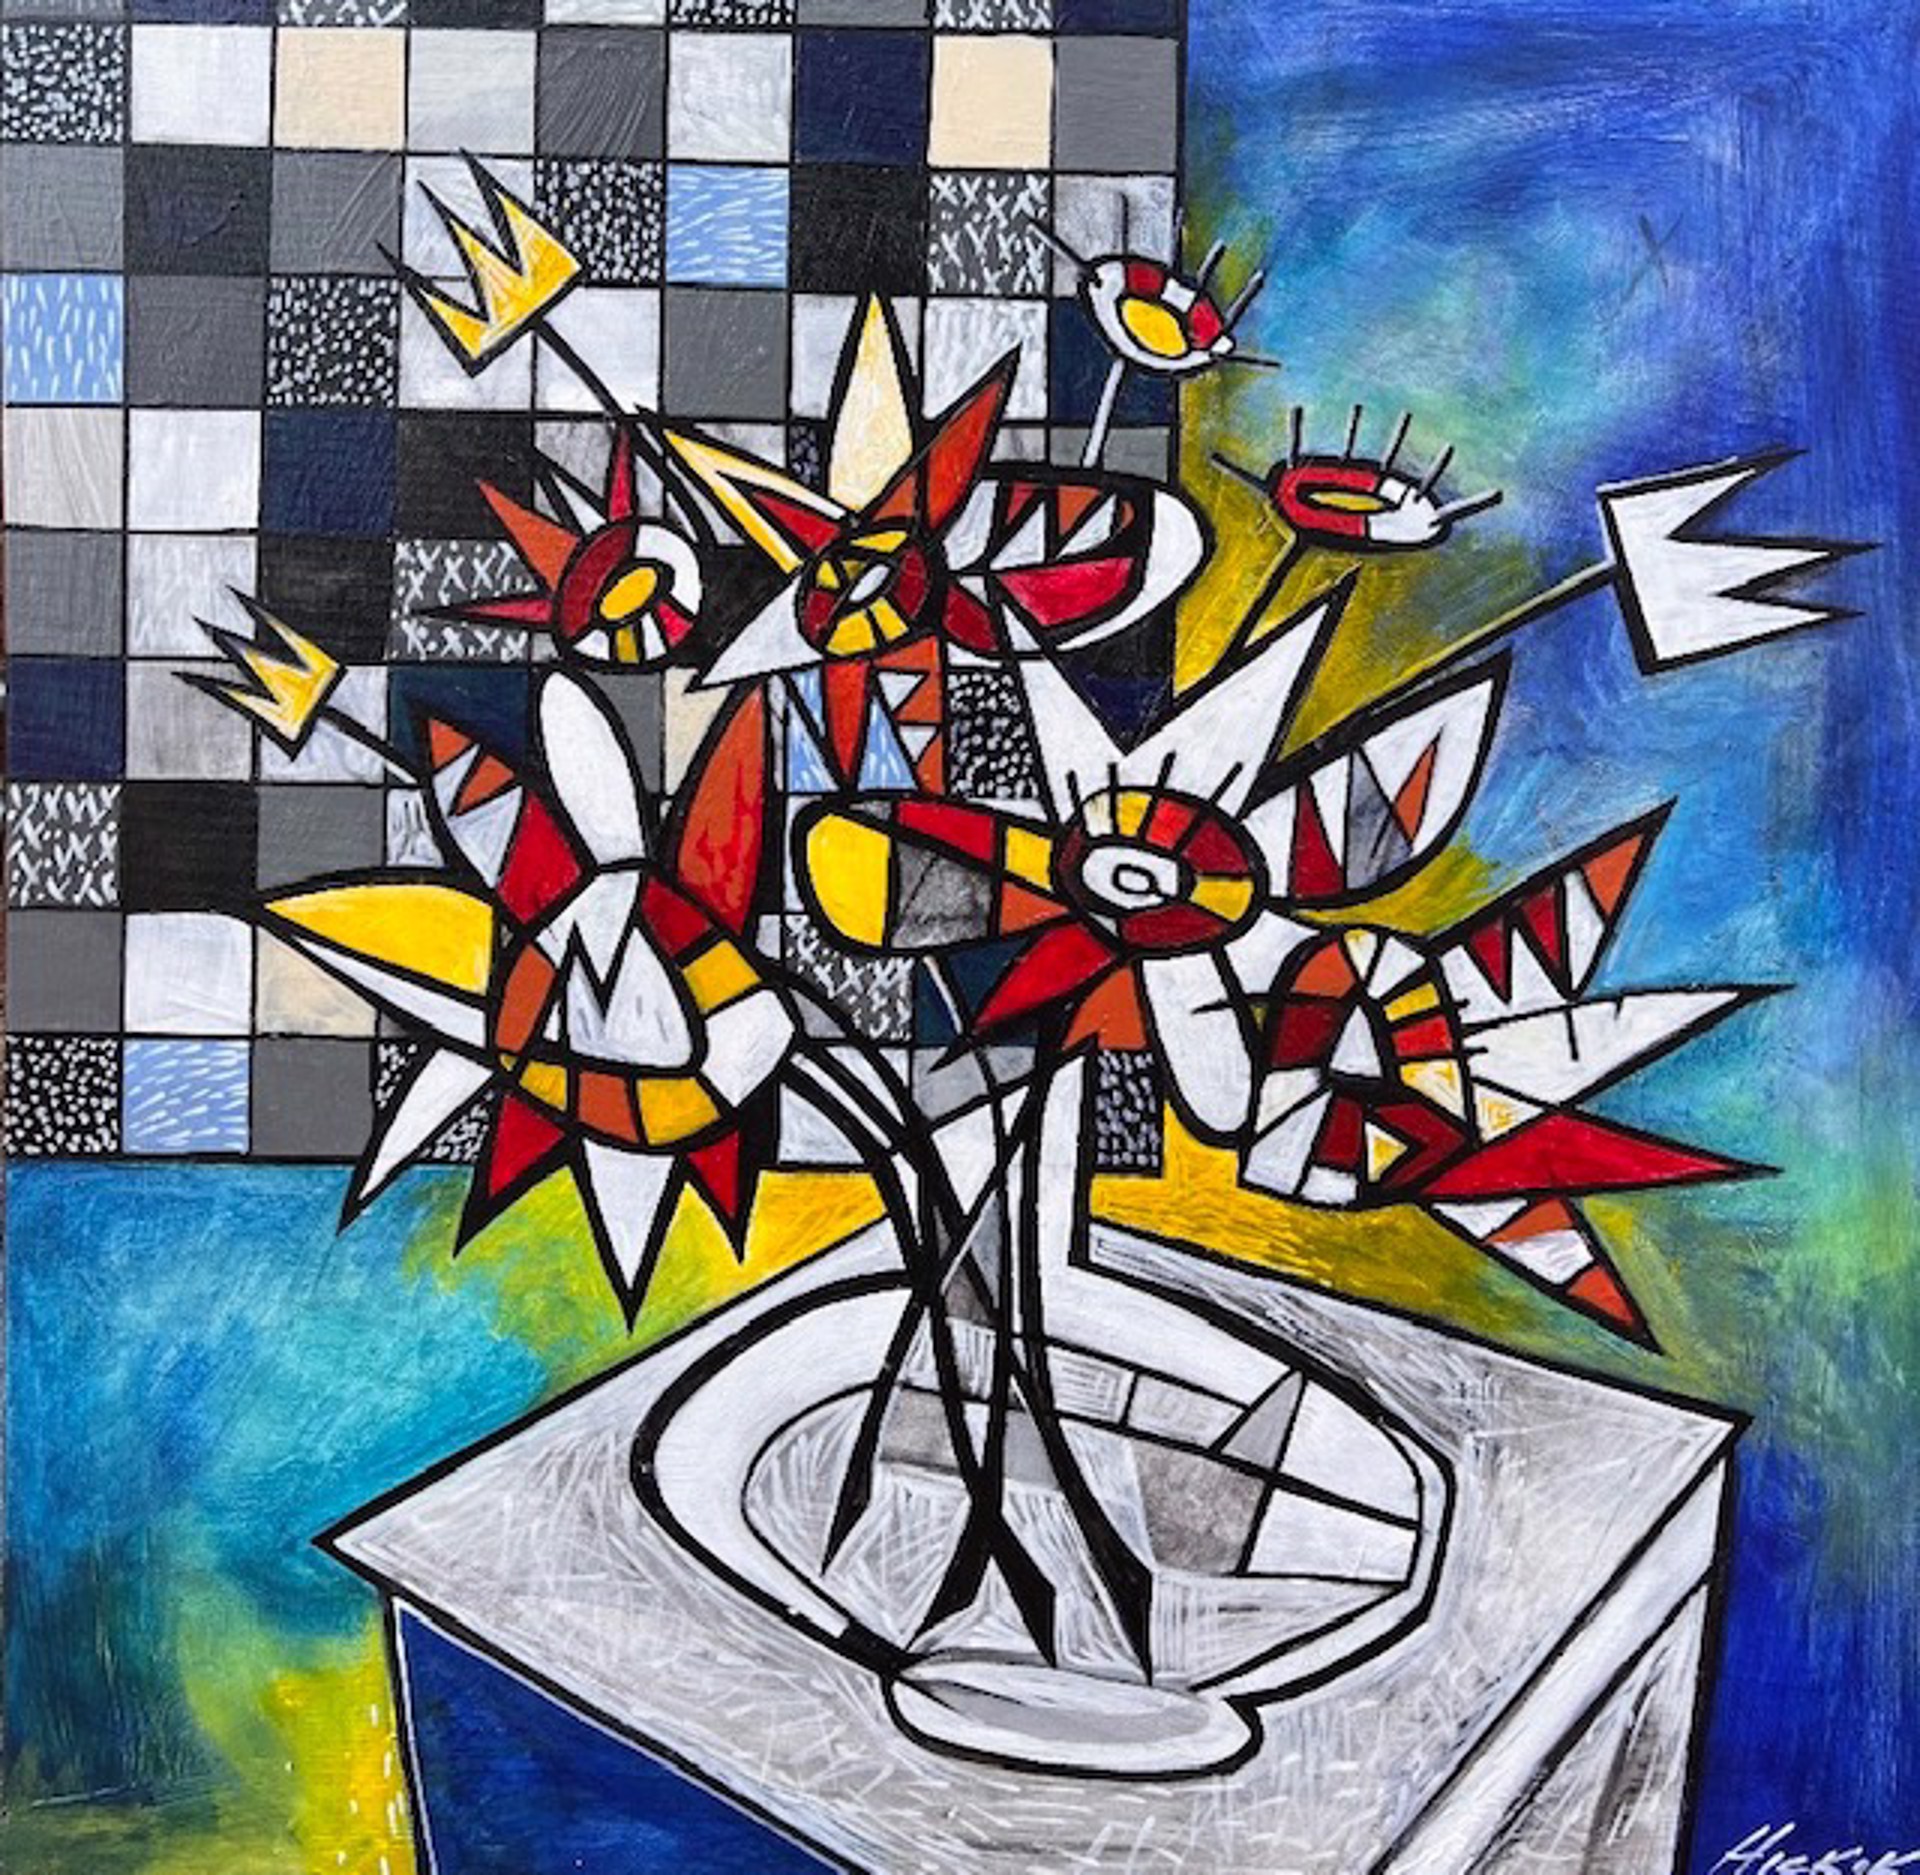 Picasso Bloom by Steve Hickok